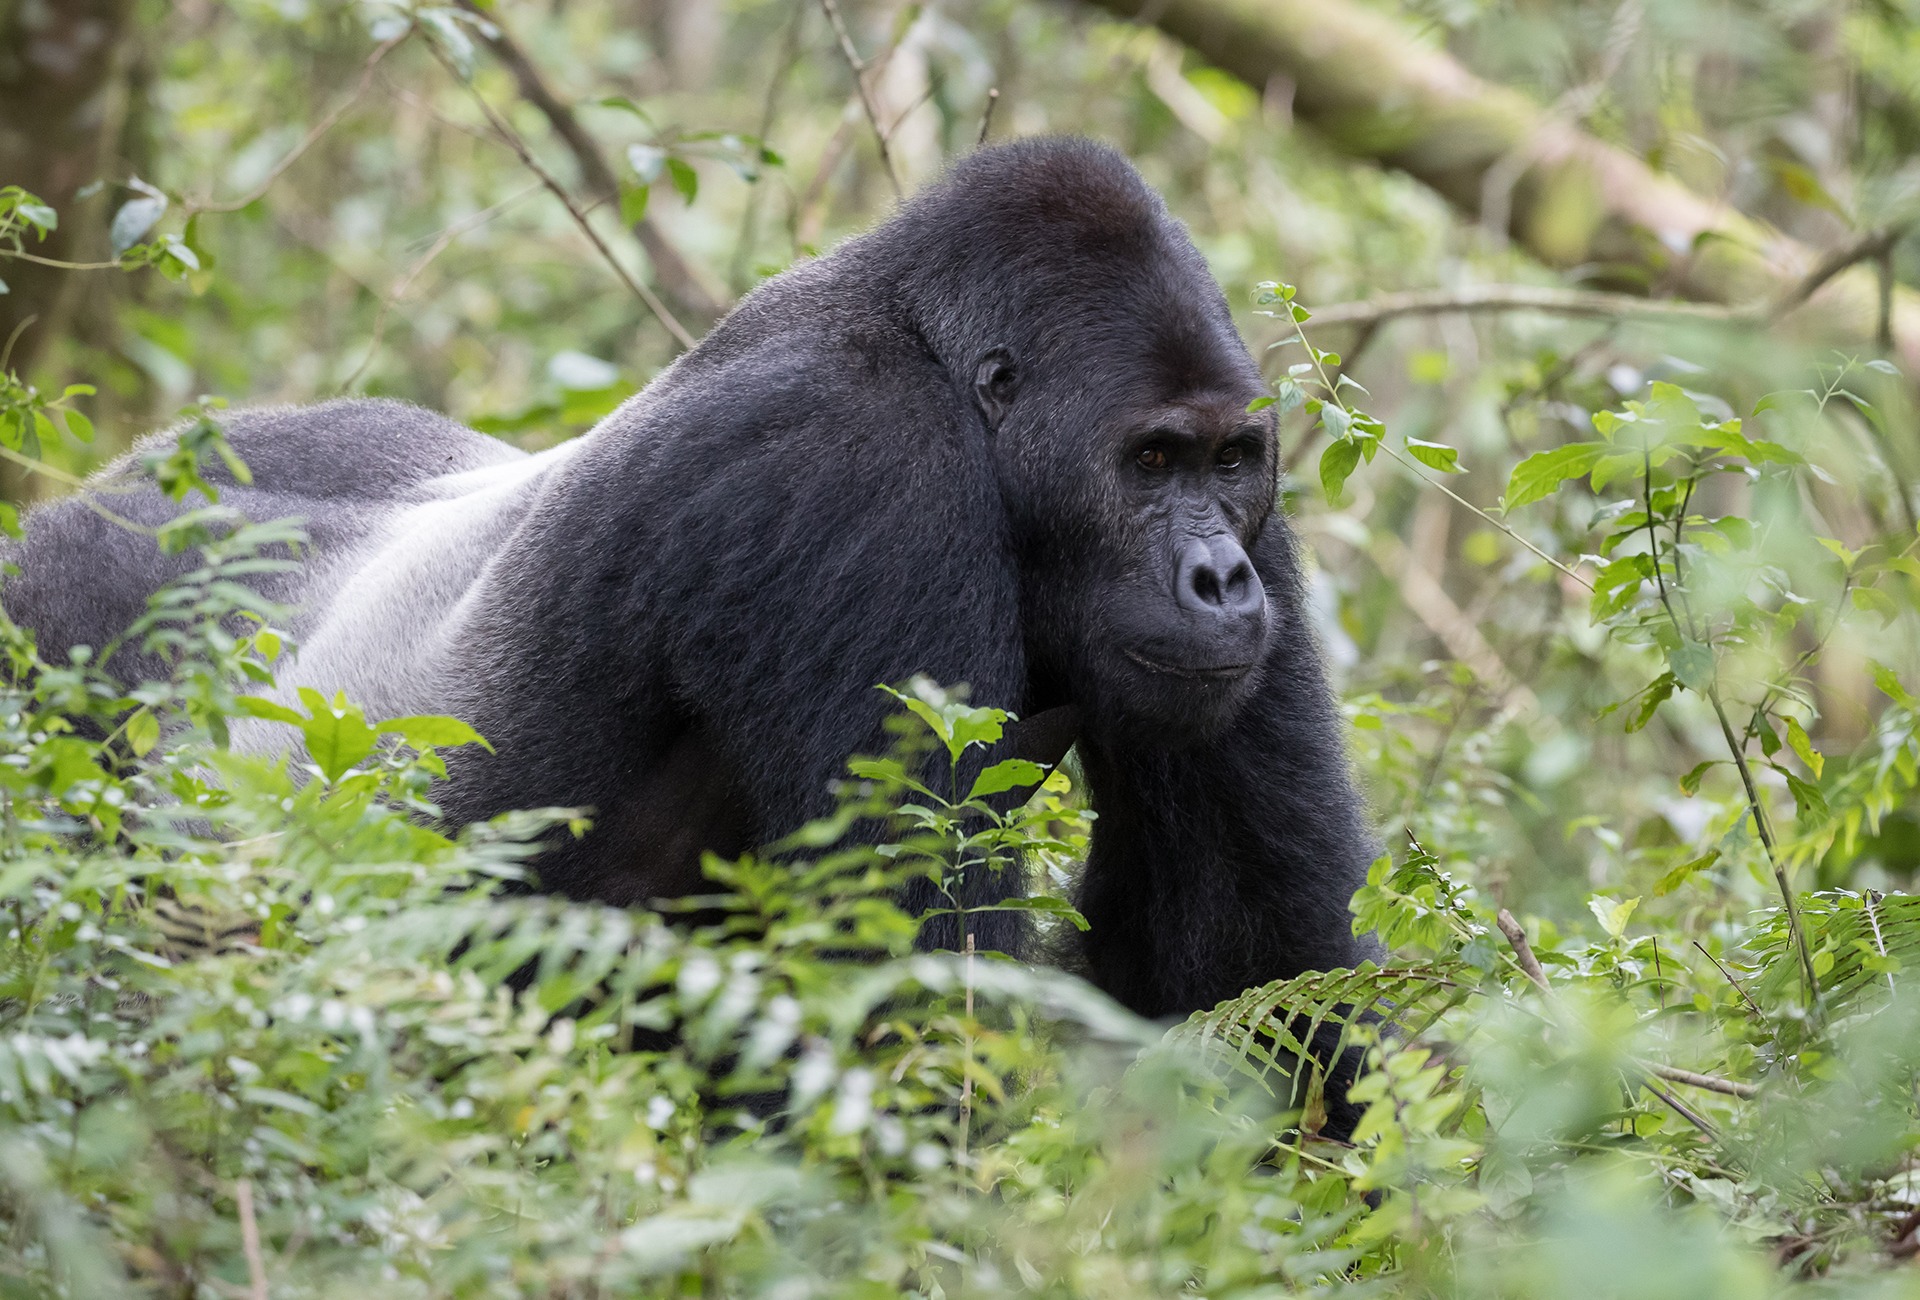 Male Silverback Grauer's Gorilla or Eastern Lowland Gorilla, by LM Images